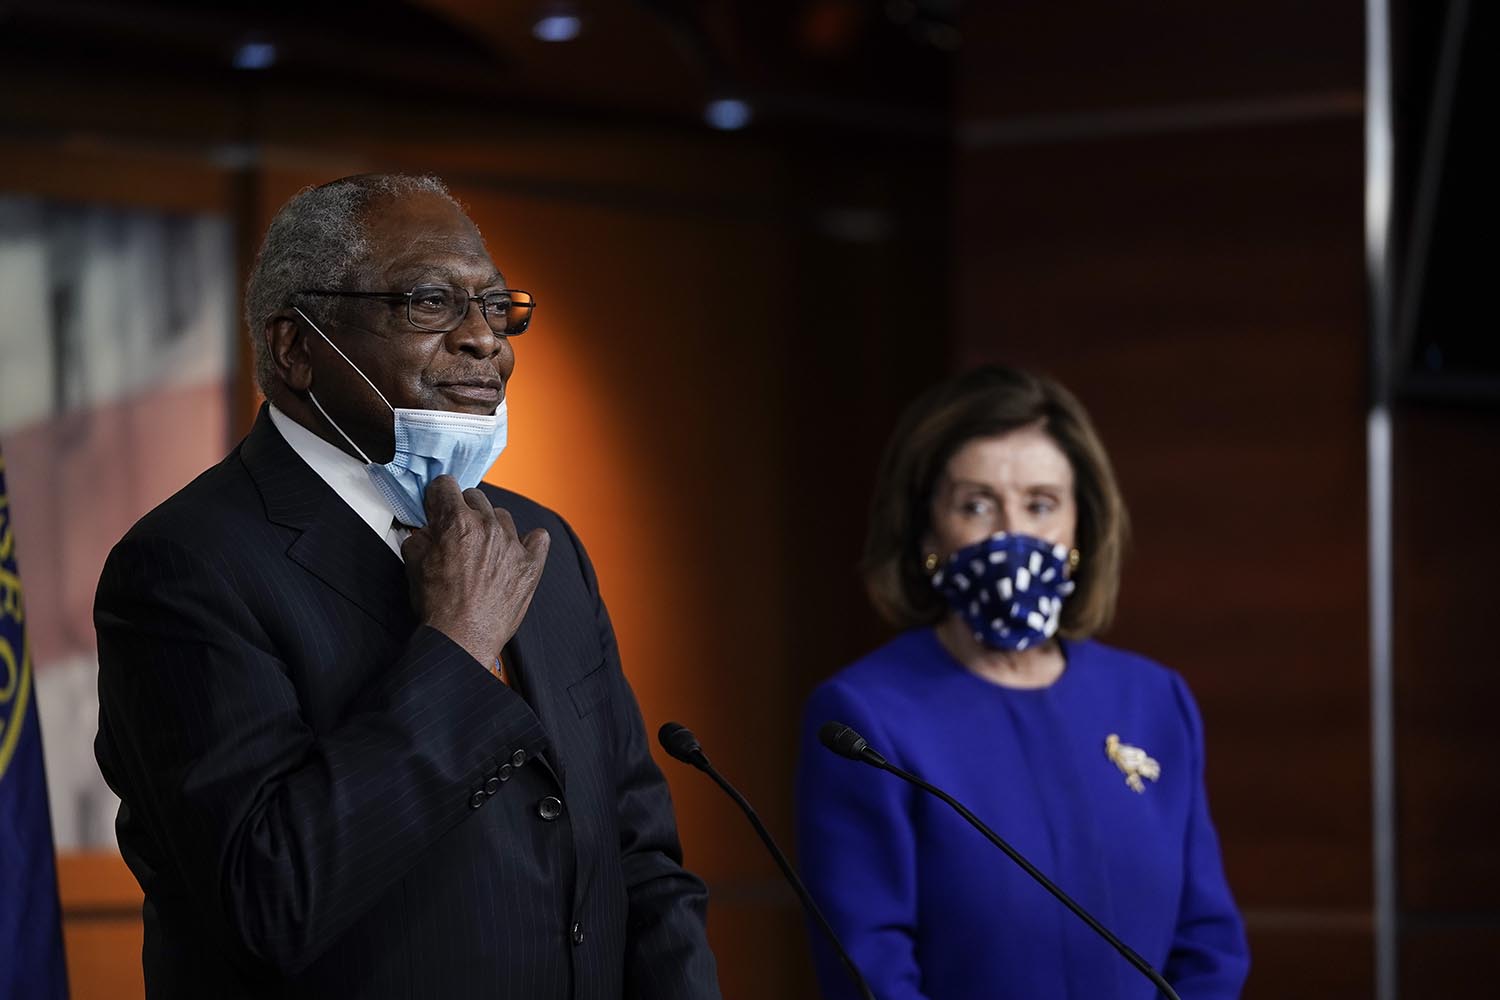 Sporting a masks is for smug liberals. Refusing to is for reckless Republicans.